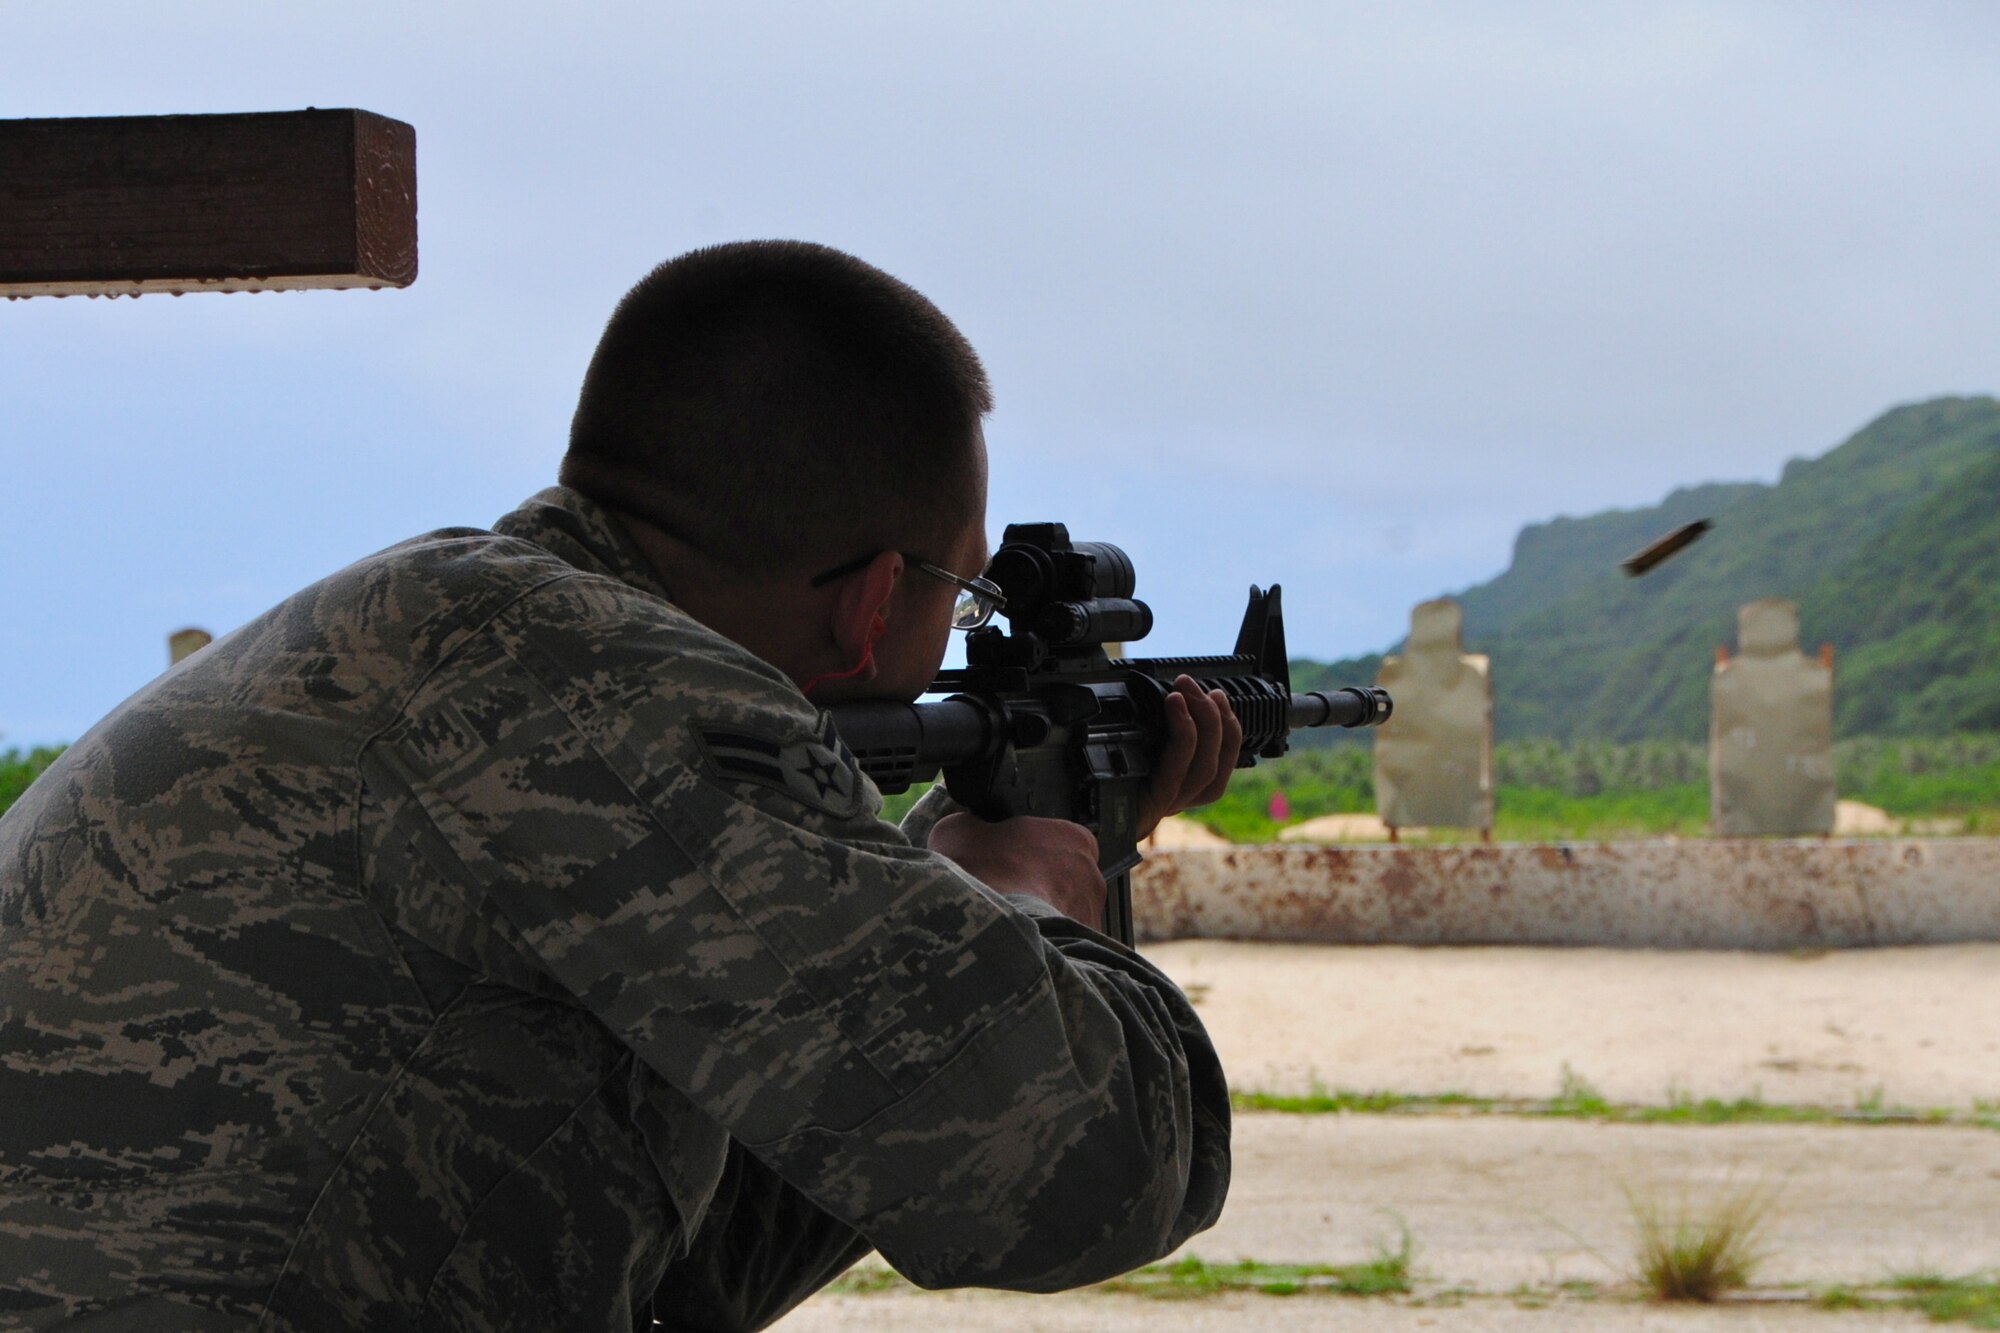 ANDERSEN AIR FORCE BASE, Guam -- Airman 1st Class Dalton Ridder, 36th Civil Engineer Squadron pavement and construction equipment apprentice, fires his weapon during the qualification portion of combat arms training here Aug. 28. The Air Force recently implemented a new weapons qualification course that contains both the original basic firing positions and a new section that includes advanced tactical movements. (U.S. Air Force photo by Airman 1st Class Marianique Santos/Released)